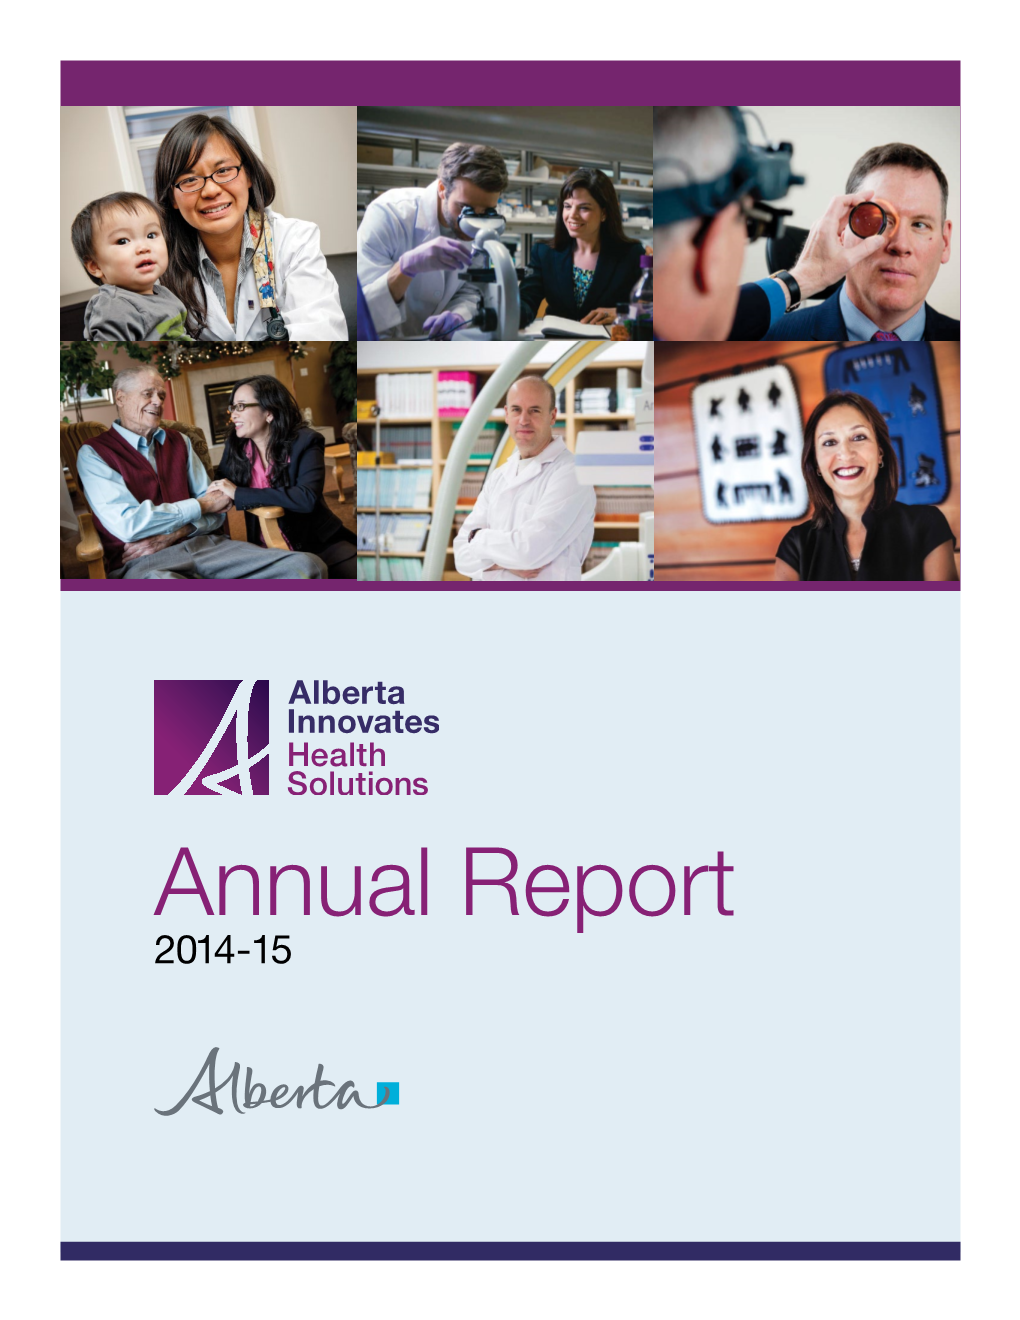 Annual Report 2014-15 Transforming Health and Wellbeing Through Research and Innovation